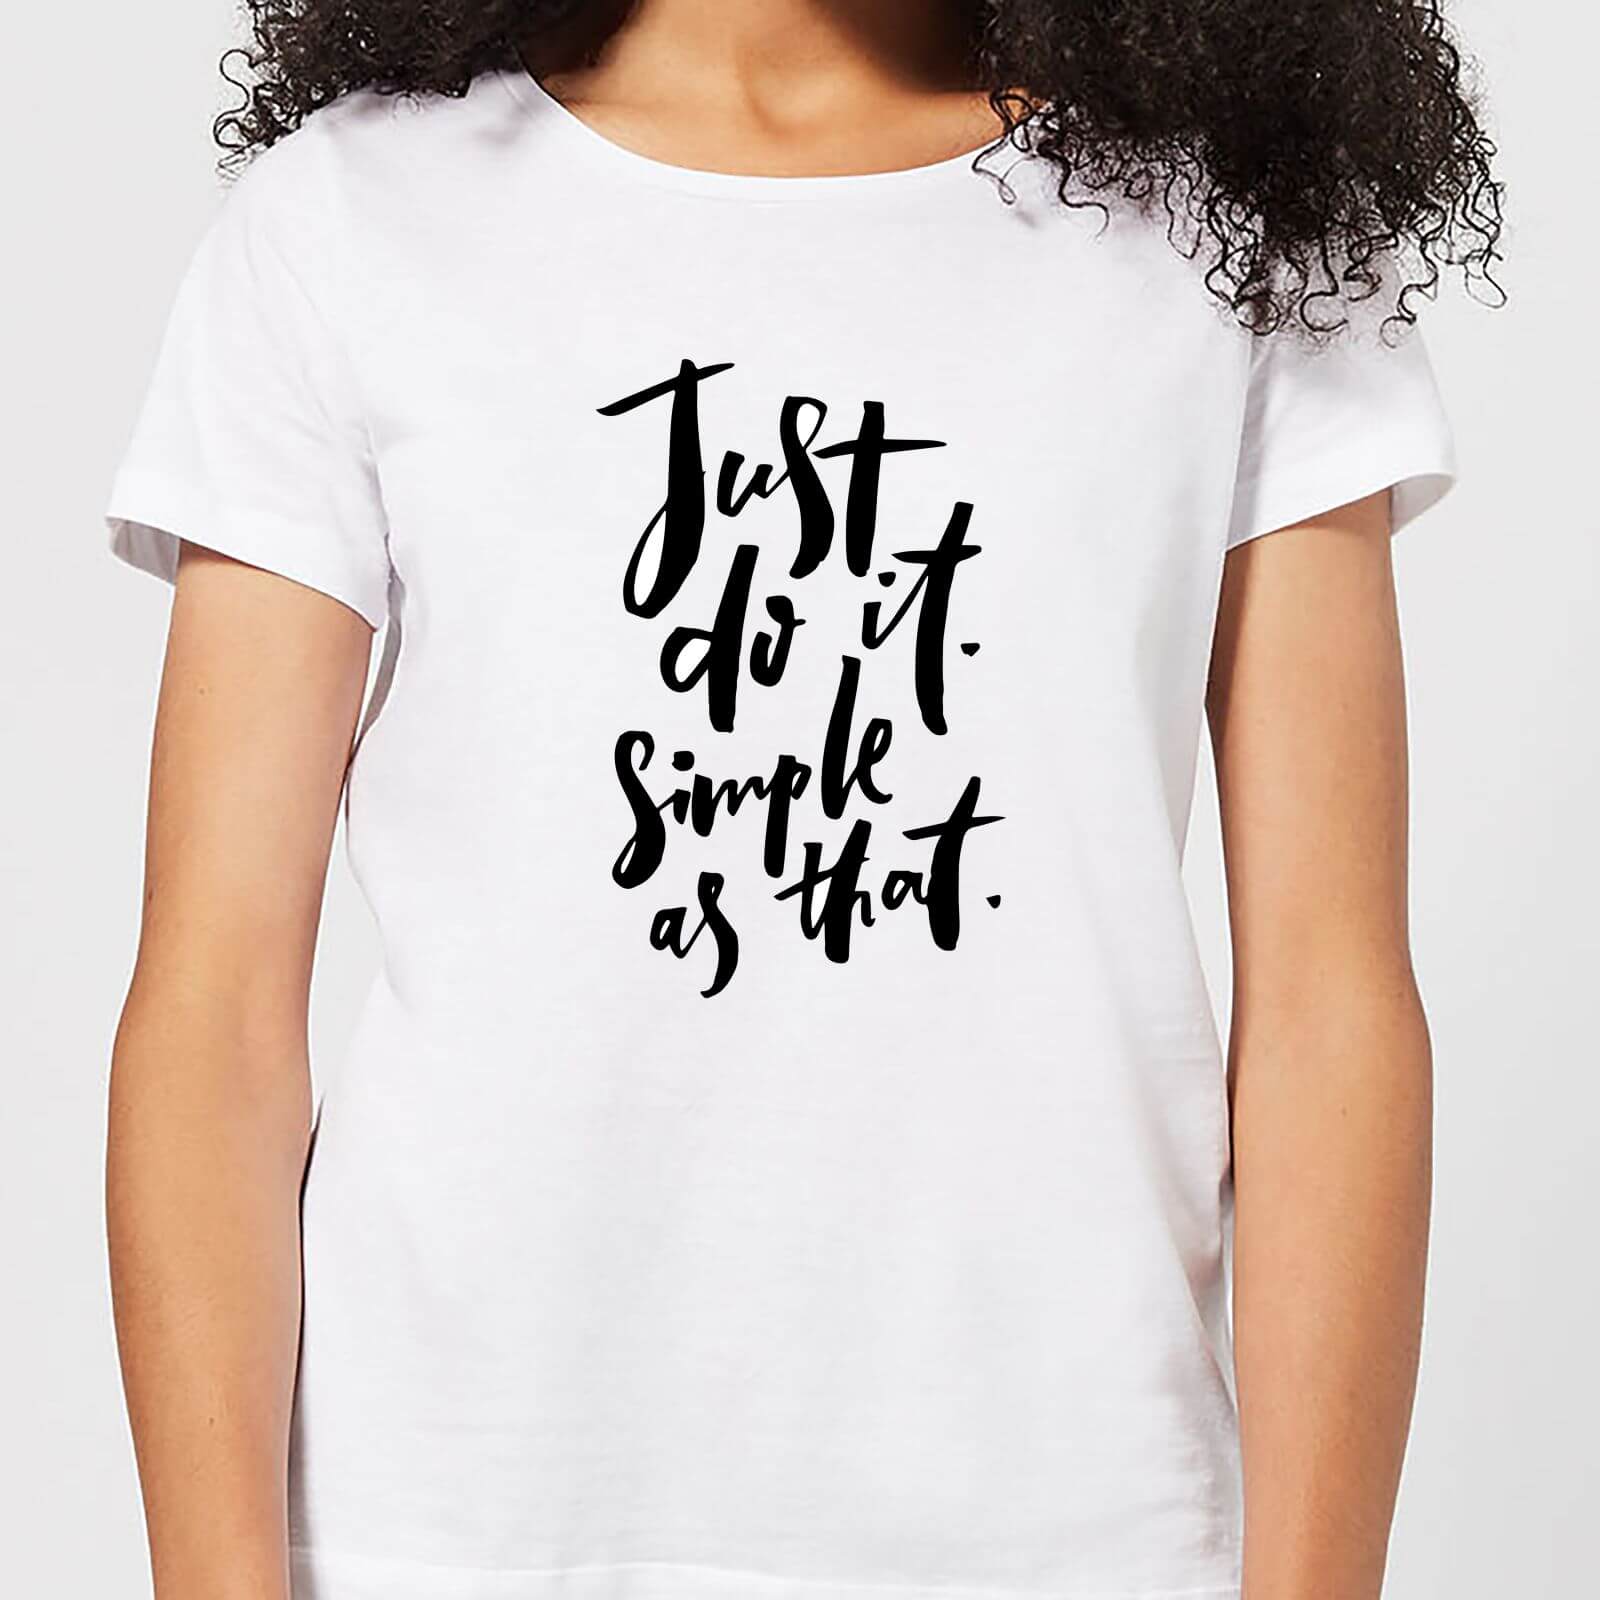 Just Do It, Simple As That Women's T-Shirt - White - S - White